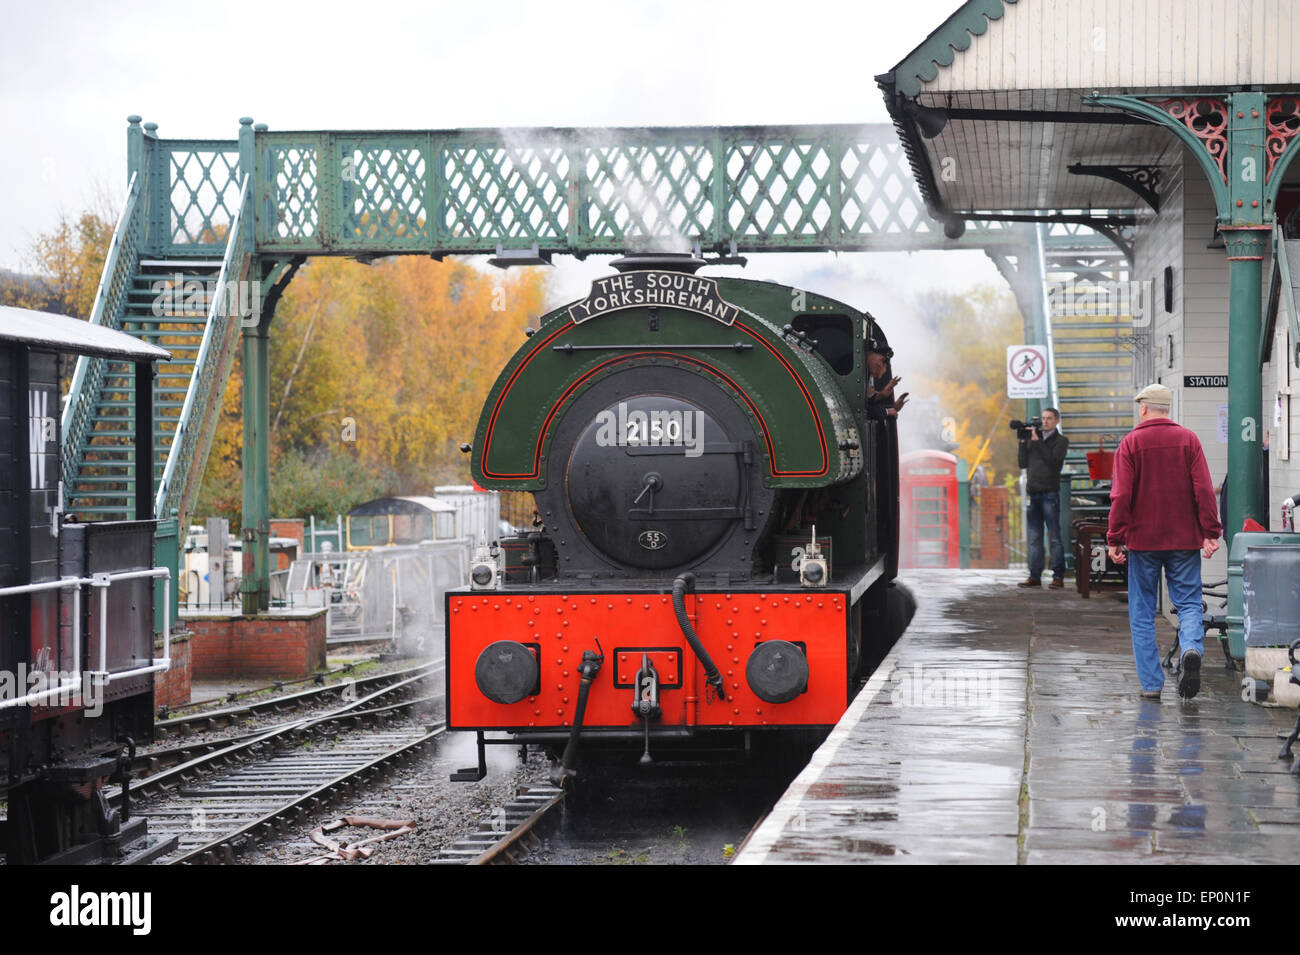 A steam train arriving at Elsecar Heritage Railway Station, Barnsley, South Yorkshire, UK. Picture: Scott Bairstow/Alamy Stock Photo